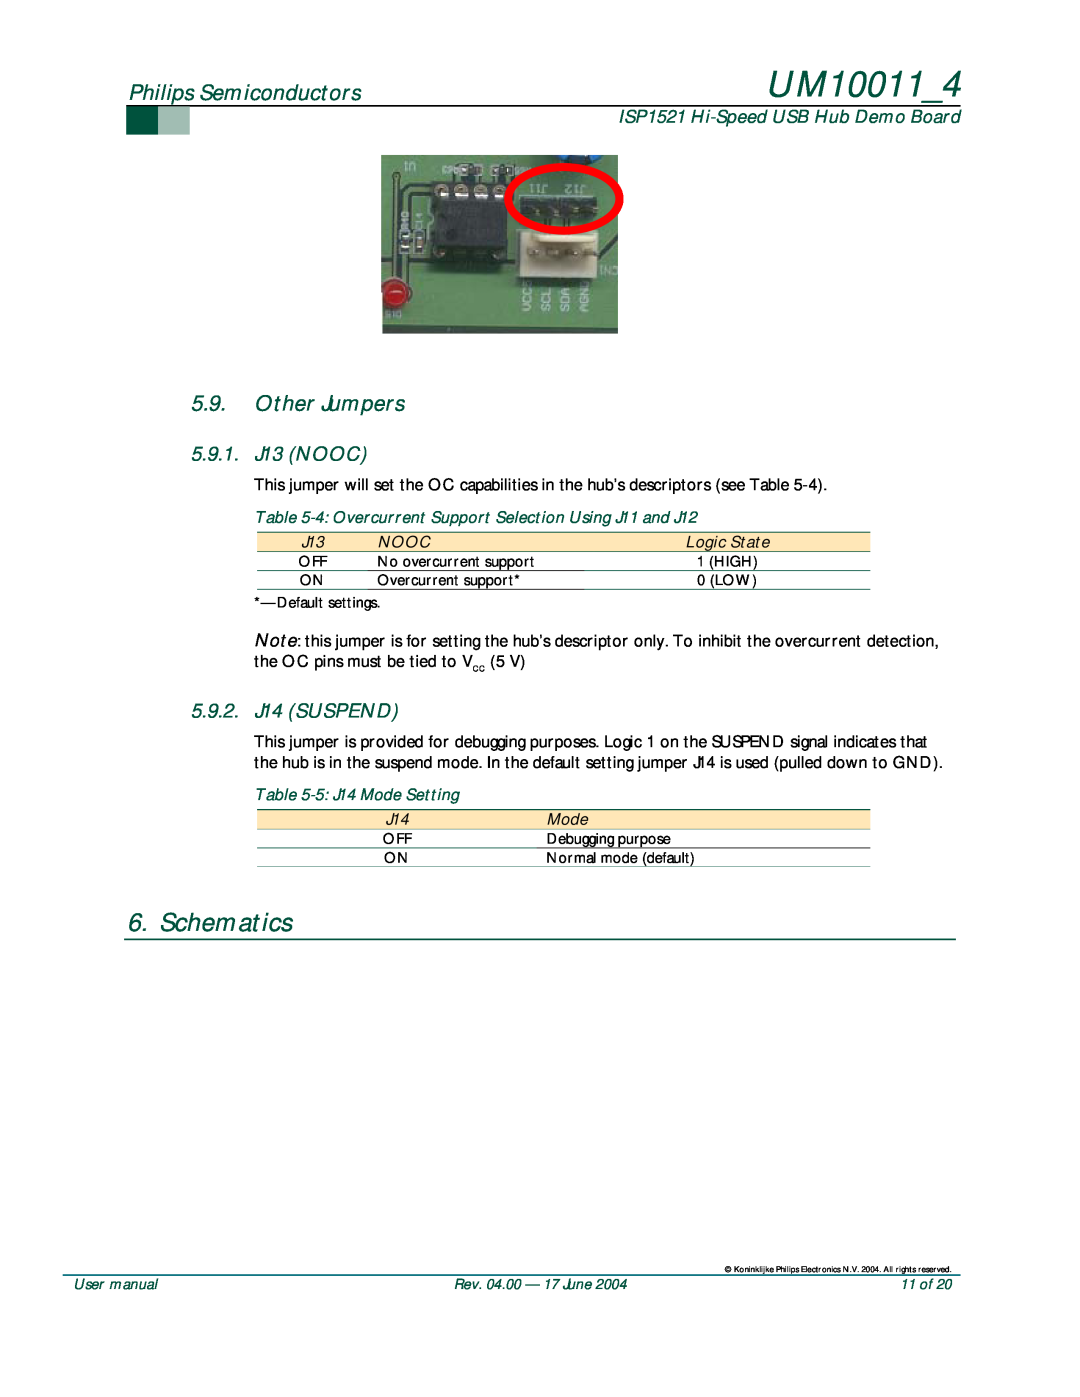 Philips user manual Schematics, Other Jumpers, 5.9.1.J13 NOOC, 5.9.2.J14 SUSPEND, UM10011_4, Philips Semiconductors 